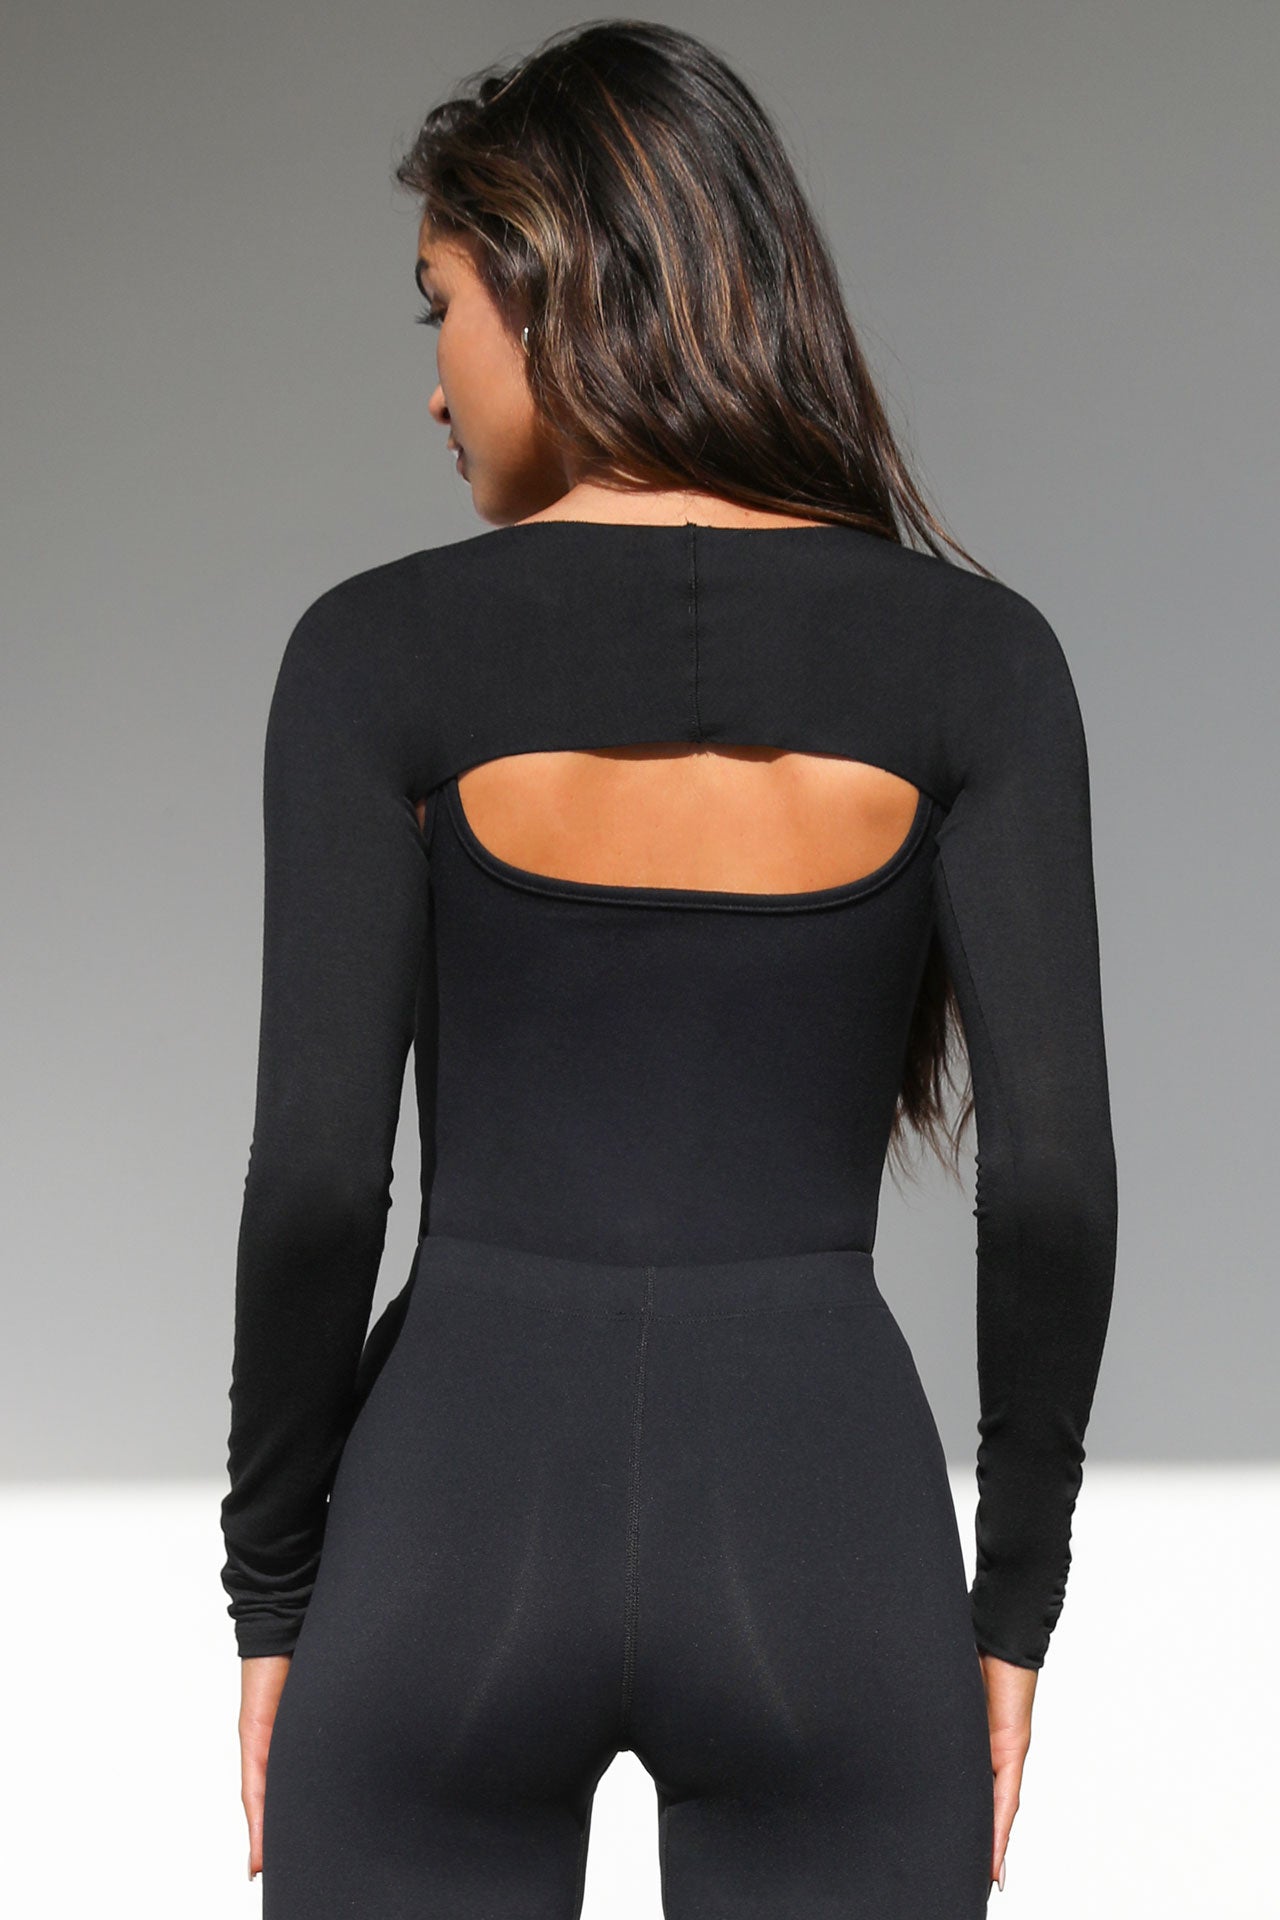 Back view of model posing in the ultra cropped black modal Shrug cardigan with fitted long sleeves